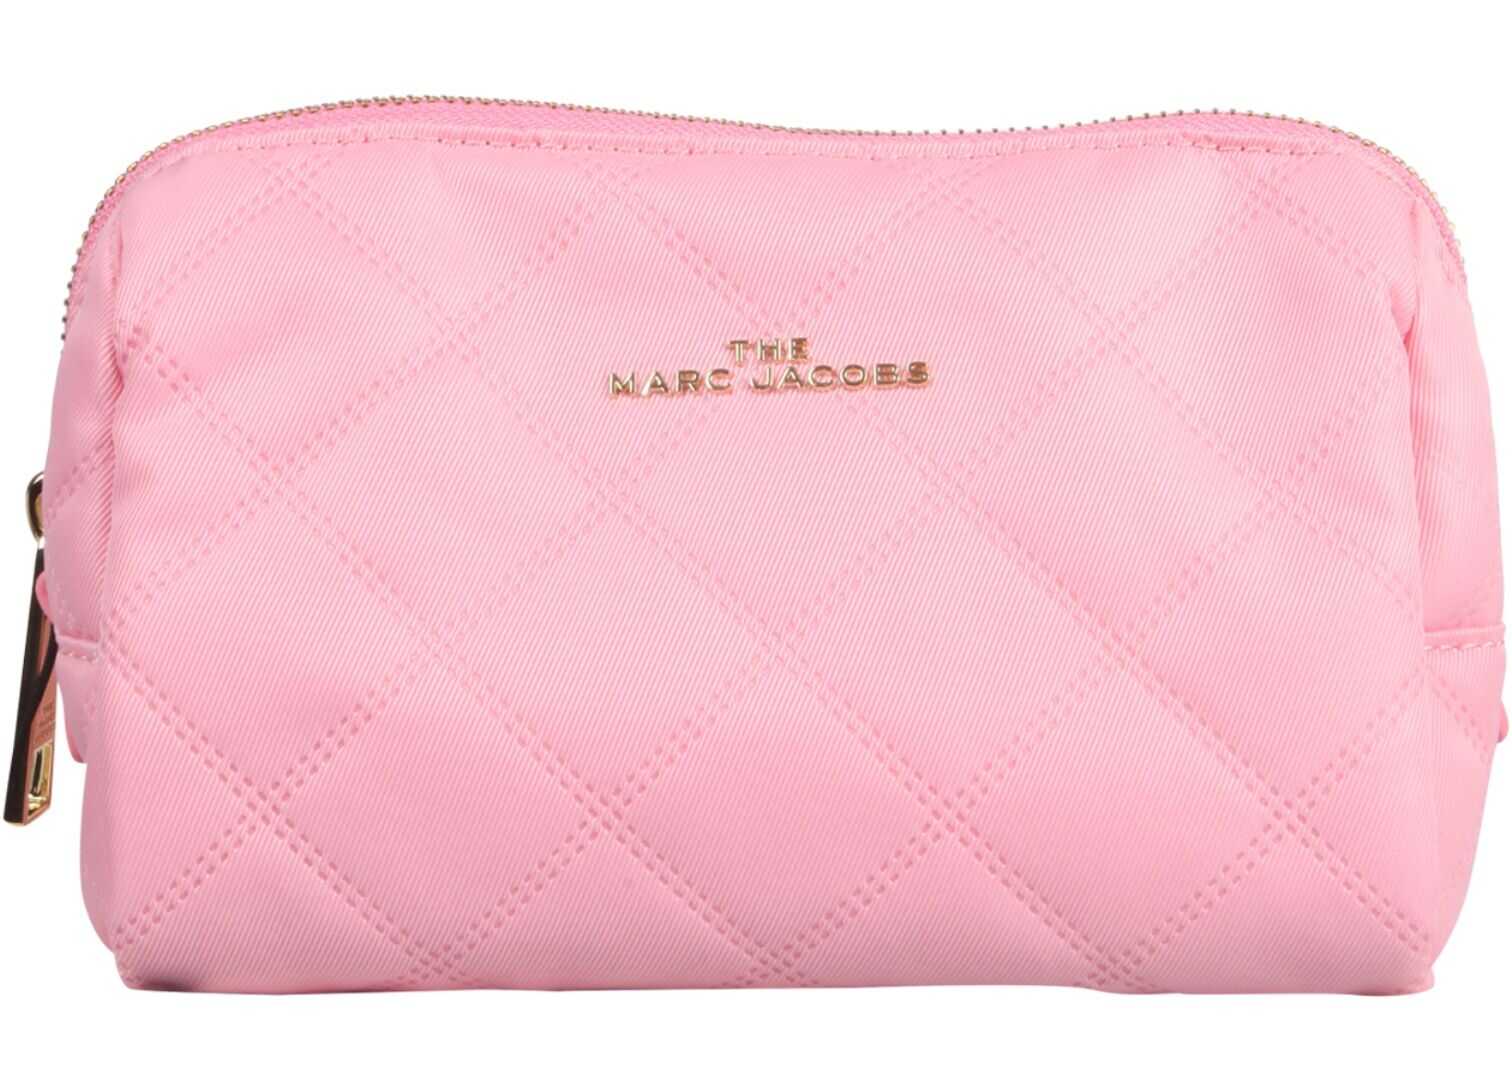 Marc Jacobs The Beauty Triangle Pouch M0016520_699 PINK